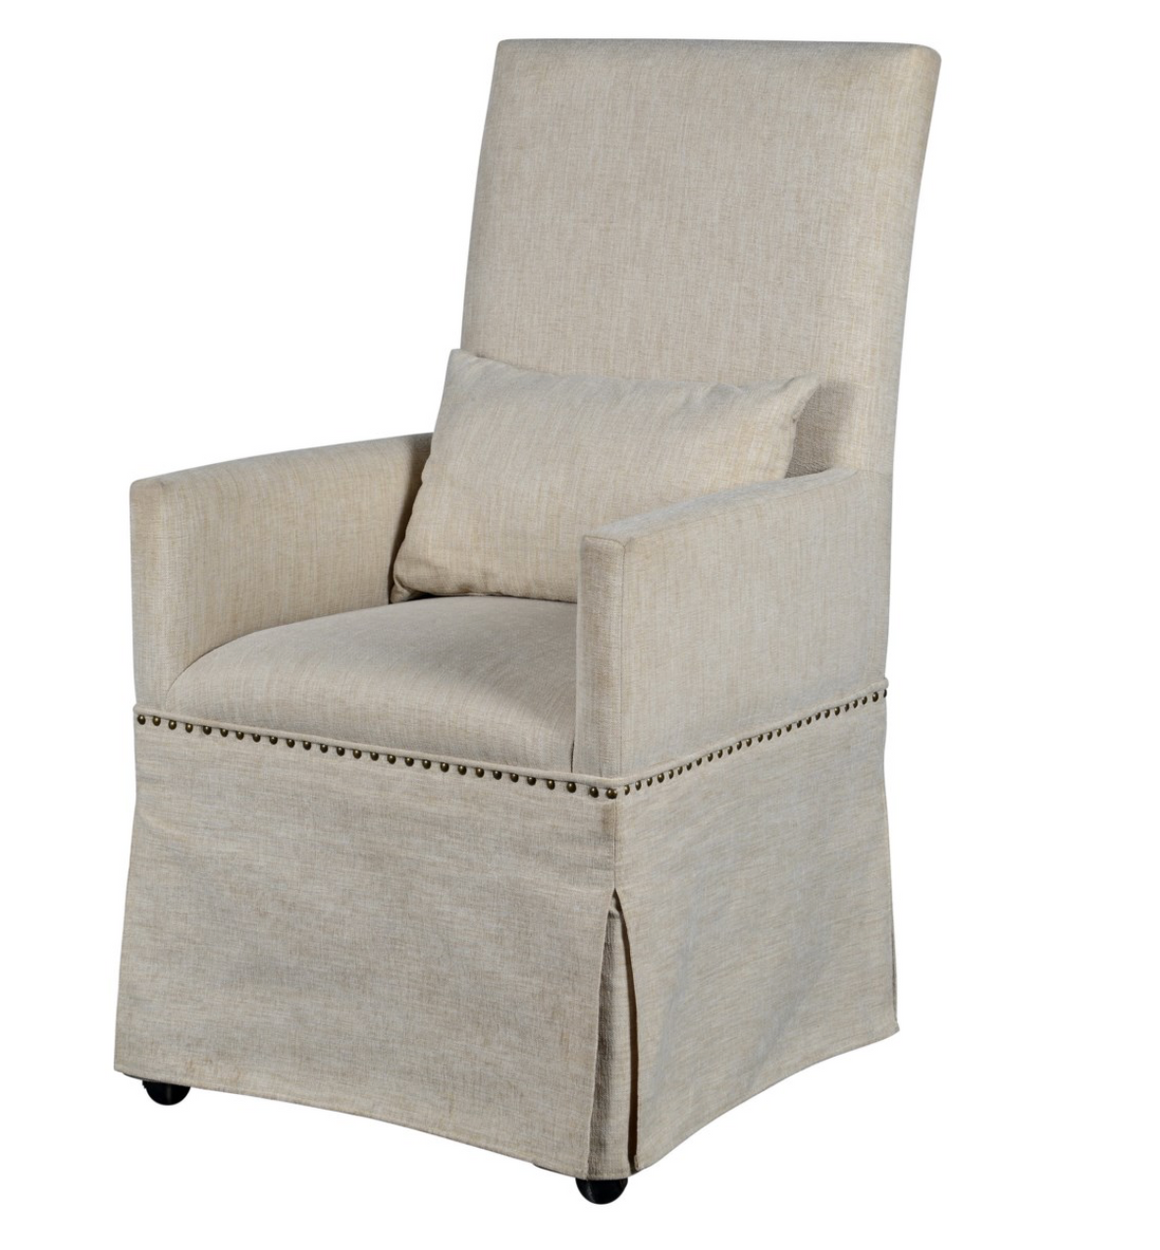 Mandy Slipcovered Arm Chair - French Linen - Classic Carolina Home